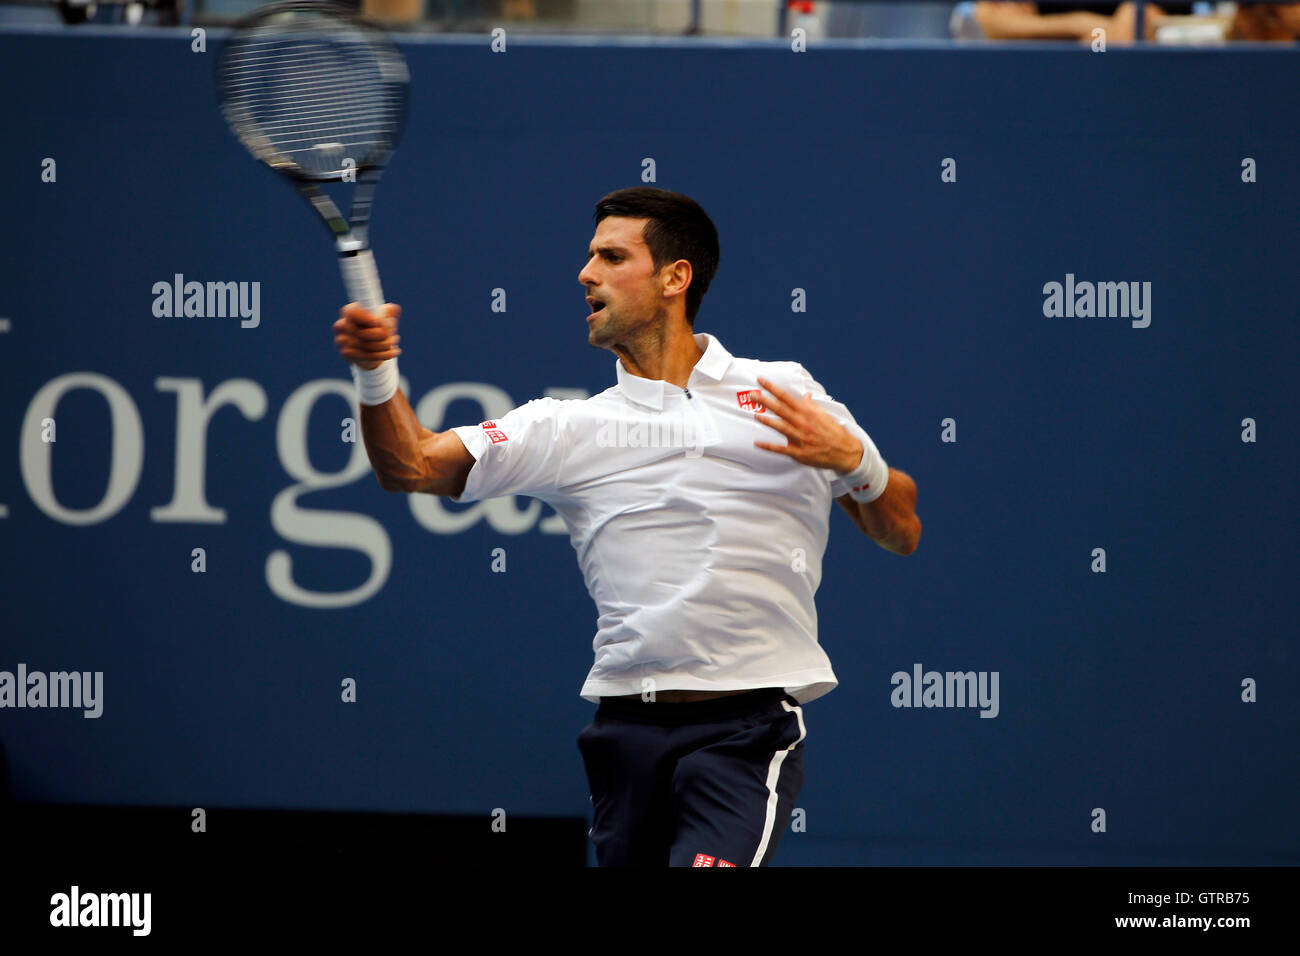 New York, United States. 09th Sep, 2016. Novak Djokovic during his semi final match against Gael Monfils of France at the United States Open Tennis Championships at Flushing Meadows, New York on Friday, September 9th. Djokovic won the match in four sets to advance to the final Credit: © Adam Stoltman/Alamy Live News Stock Photo